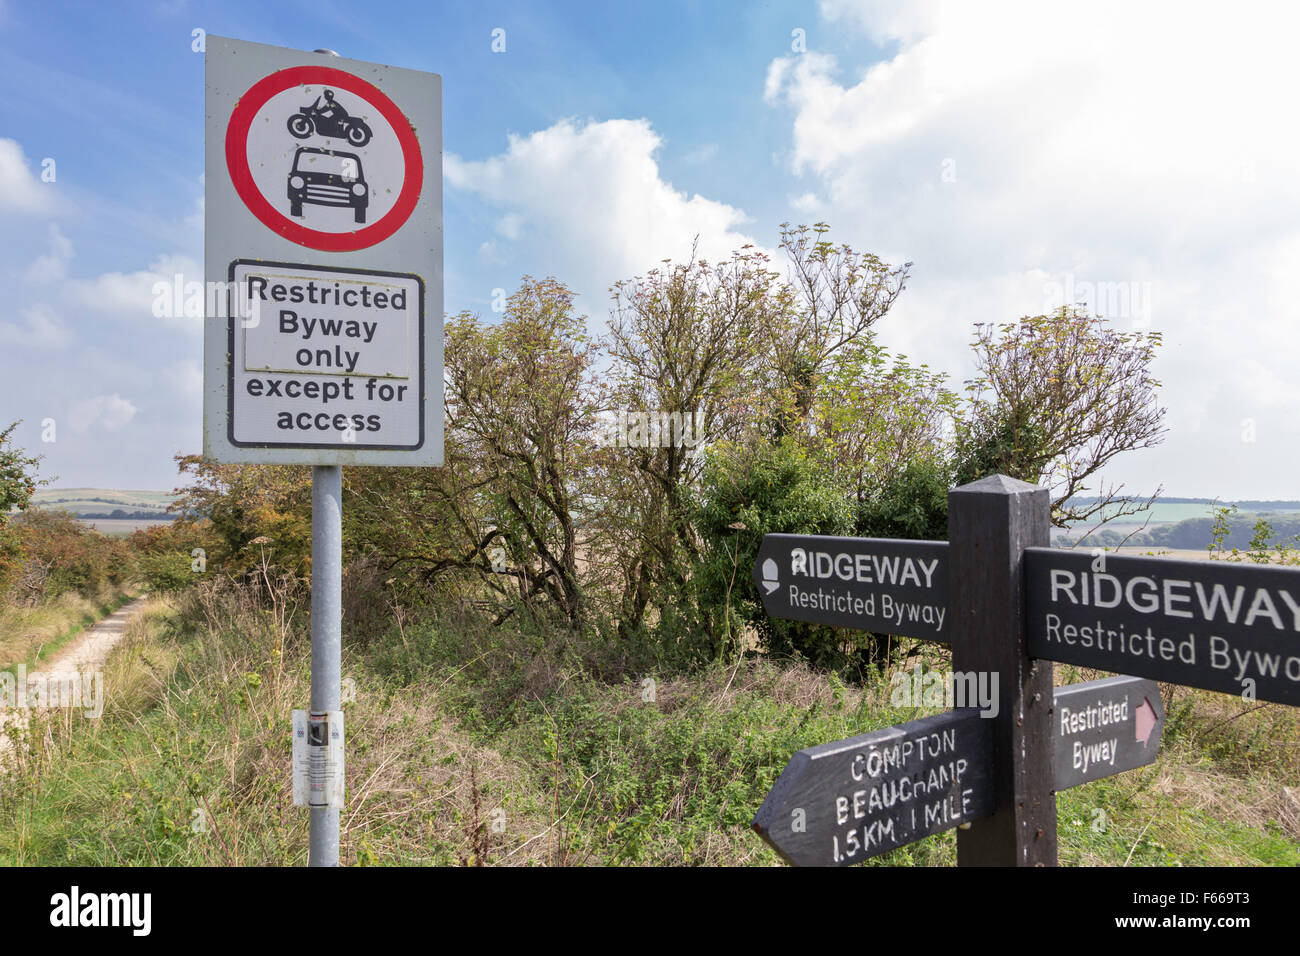 Restricted Byway signs on the Ridgeway long distance footpath near Uffington hill, Oxfordshire, England, UK Stock Photo